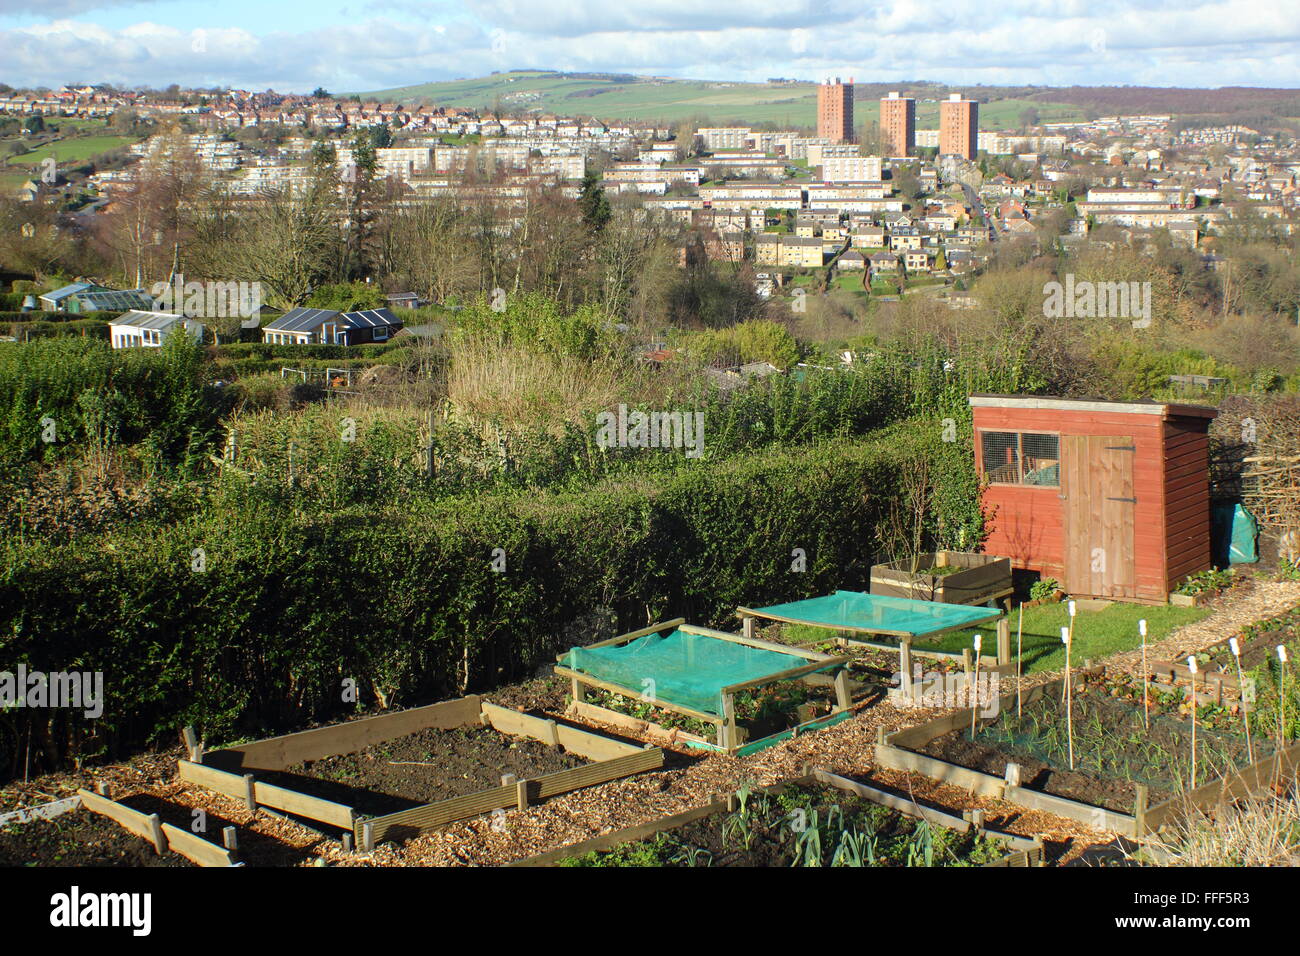 Allotments on a hillside in Sheffield, south Yorkshire looking to the hills on the city's rural fringe, England UK Stock Photo